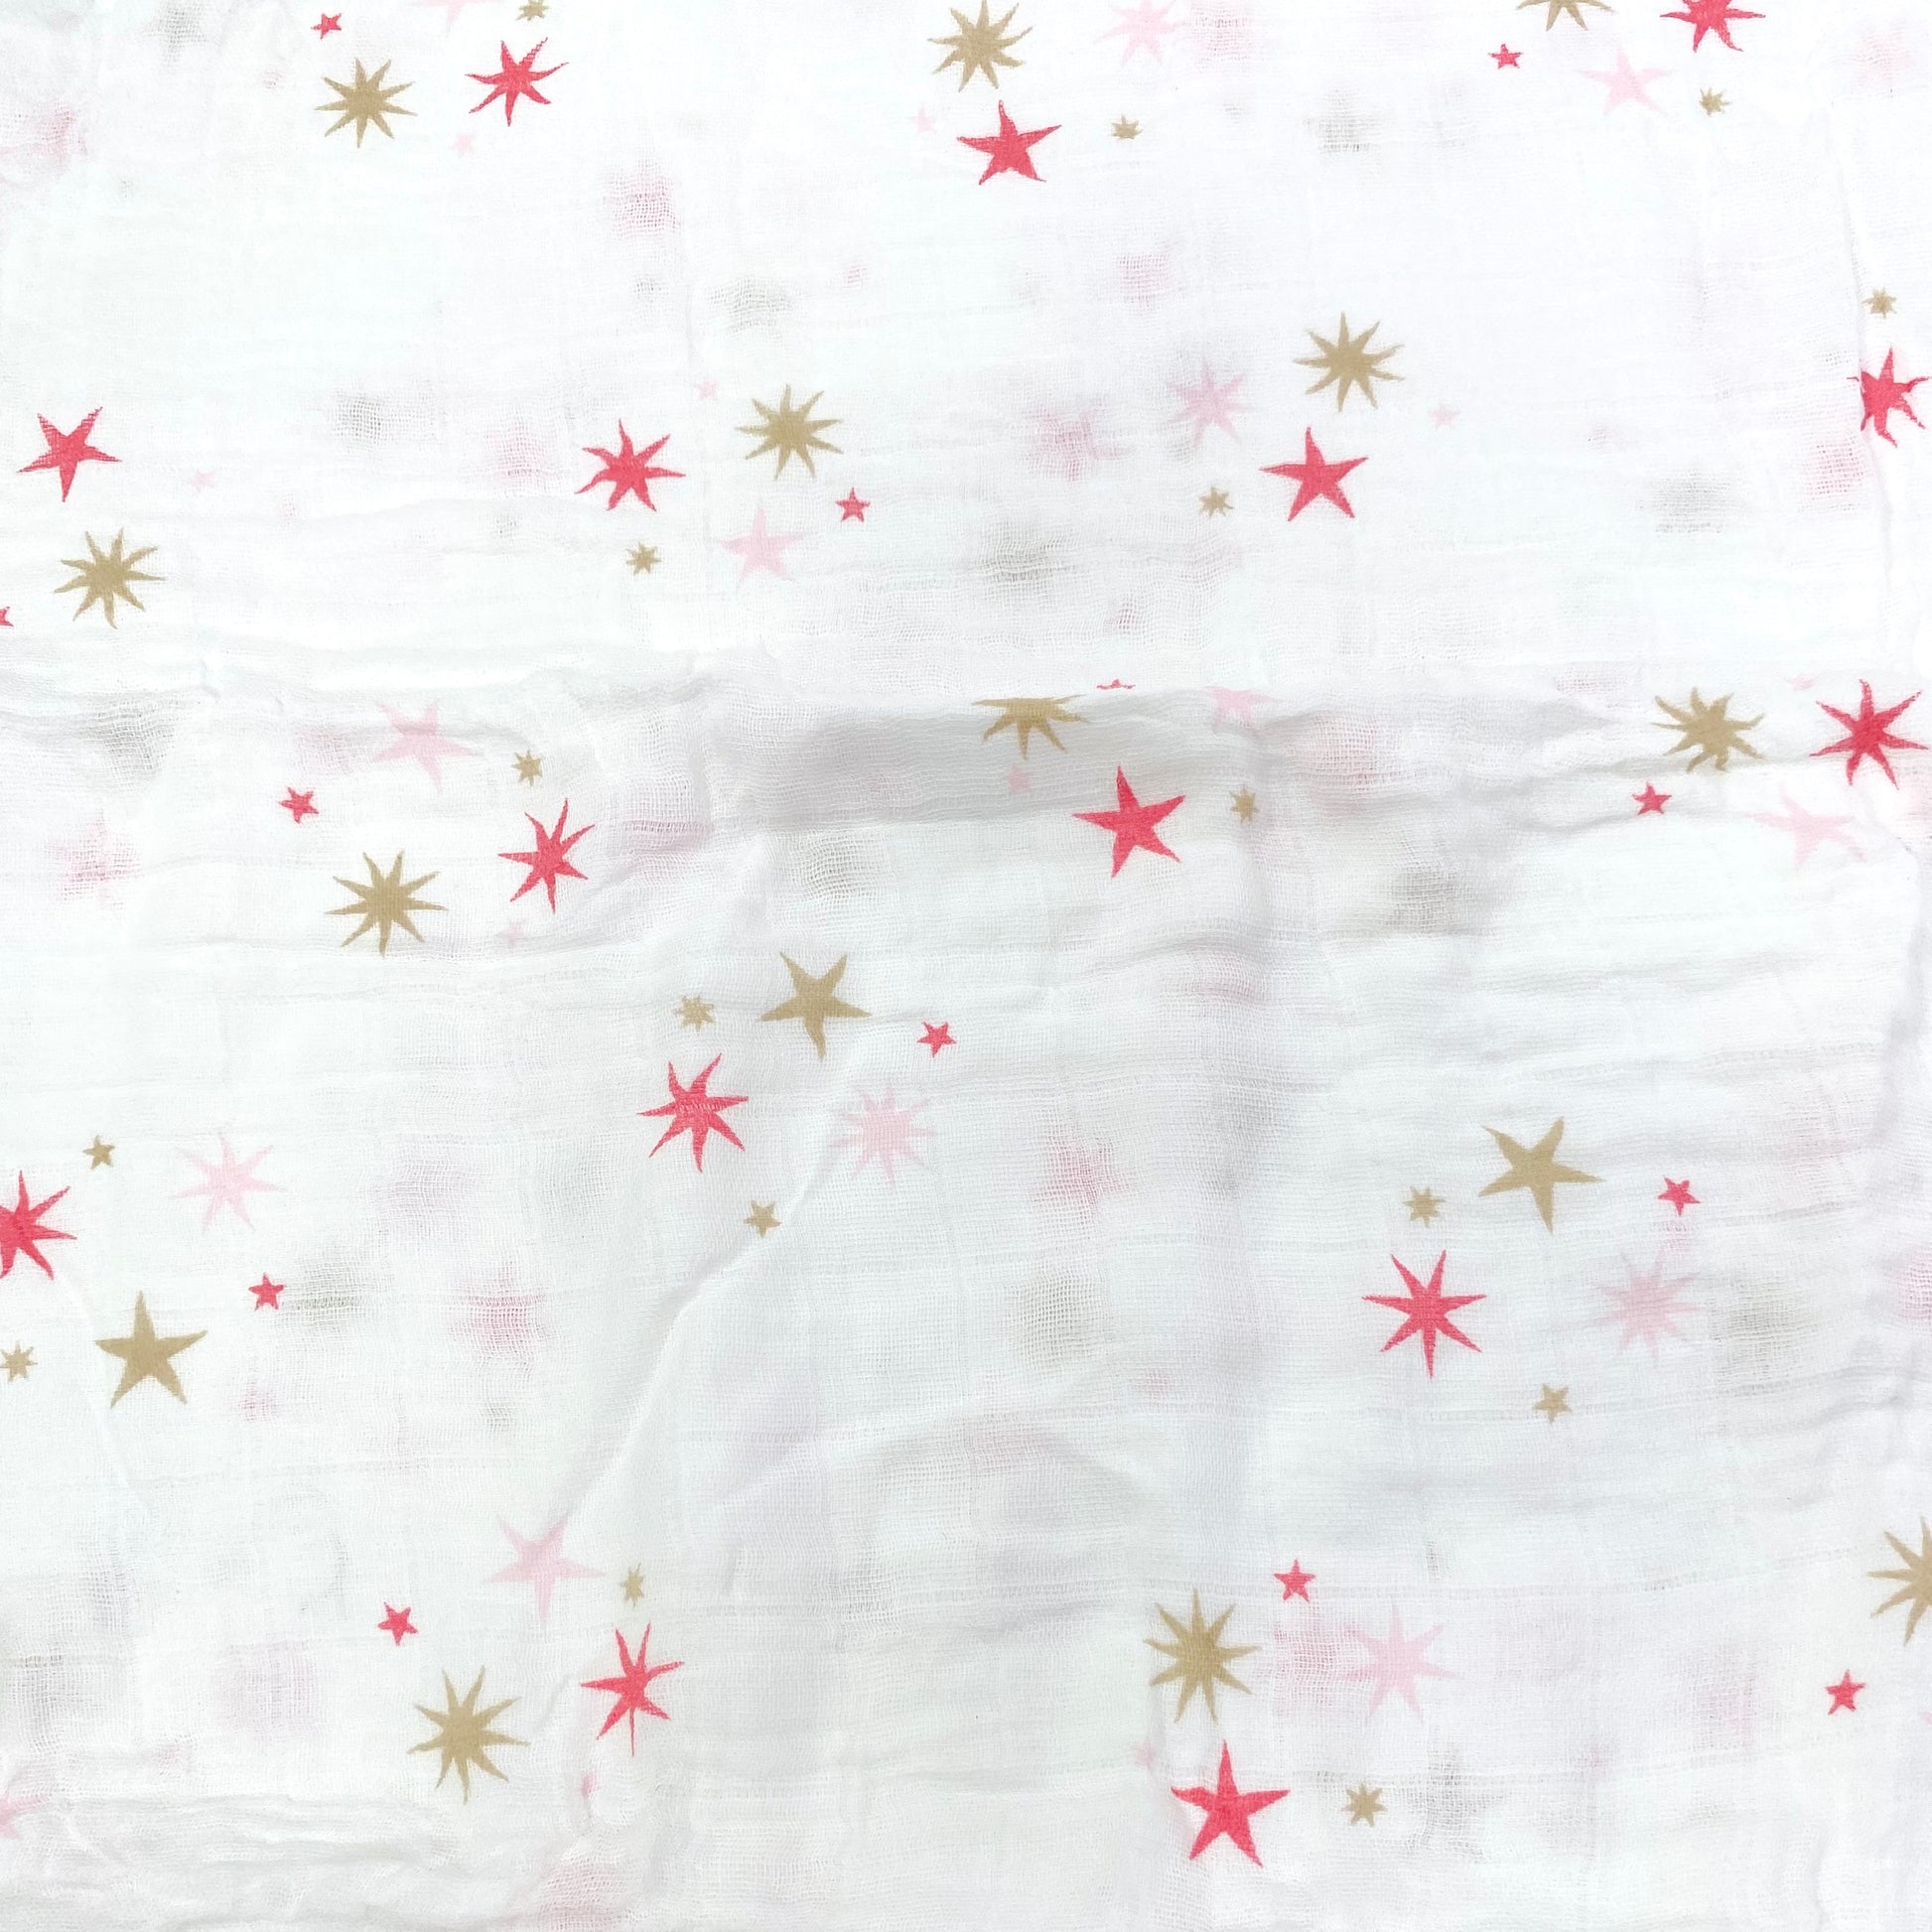 Close up pattern of a muslin swaddle blanket with a pink stars design.